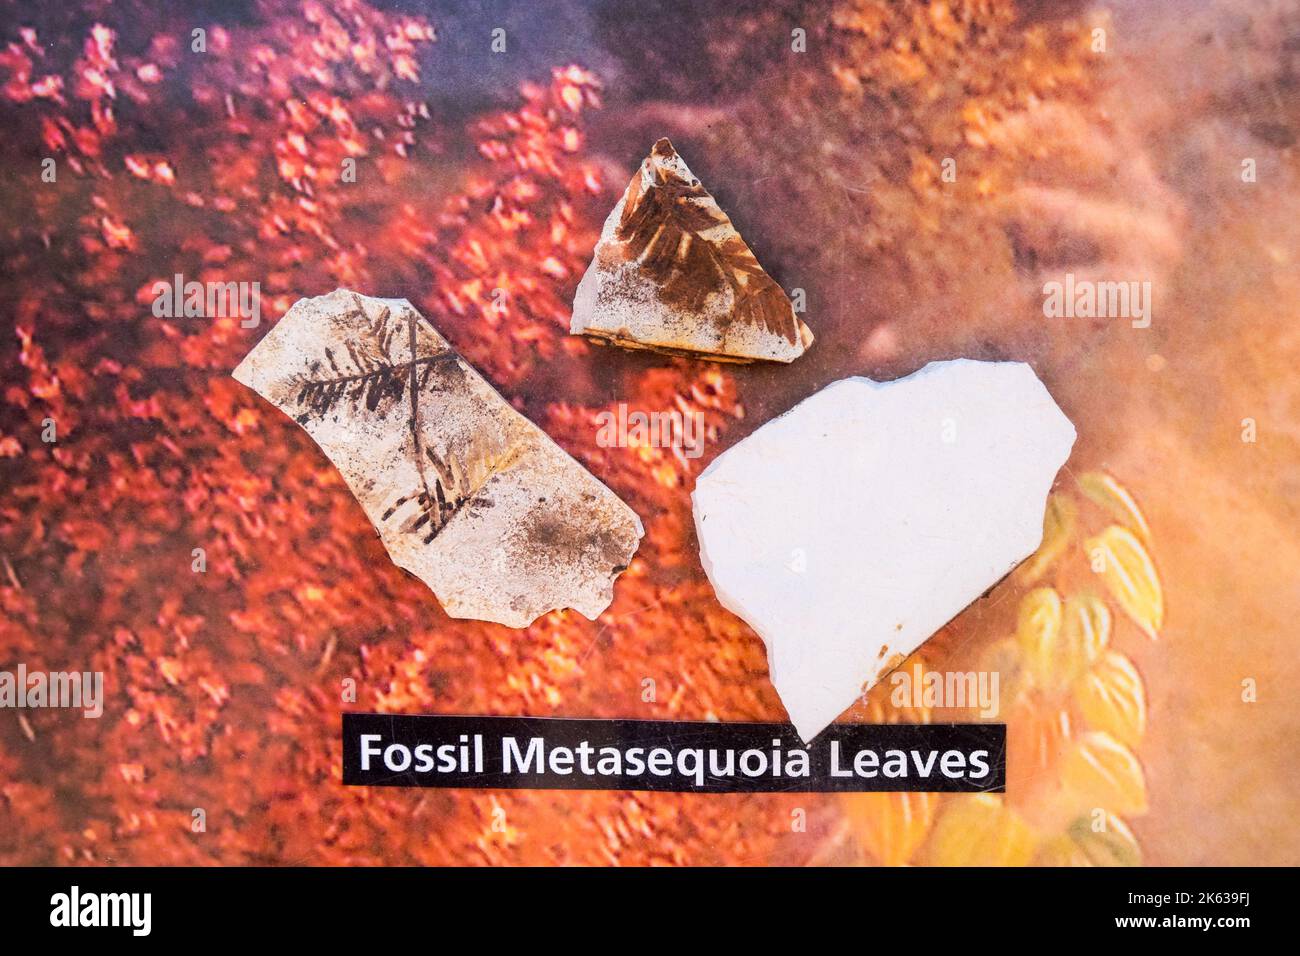 Fossil metasequoia leaves, John Day Fossil Beds, Oregon, USA Stock Photo